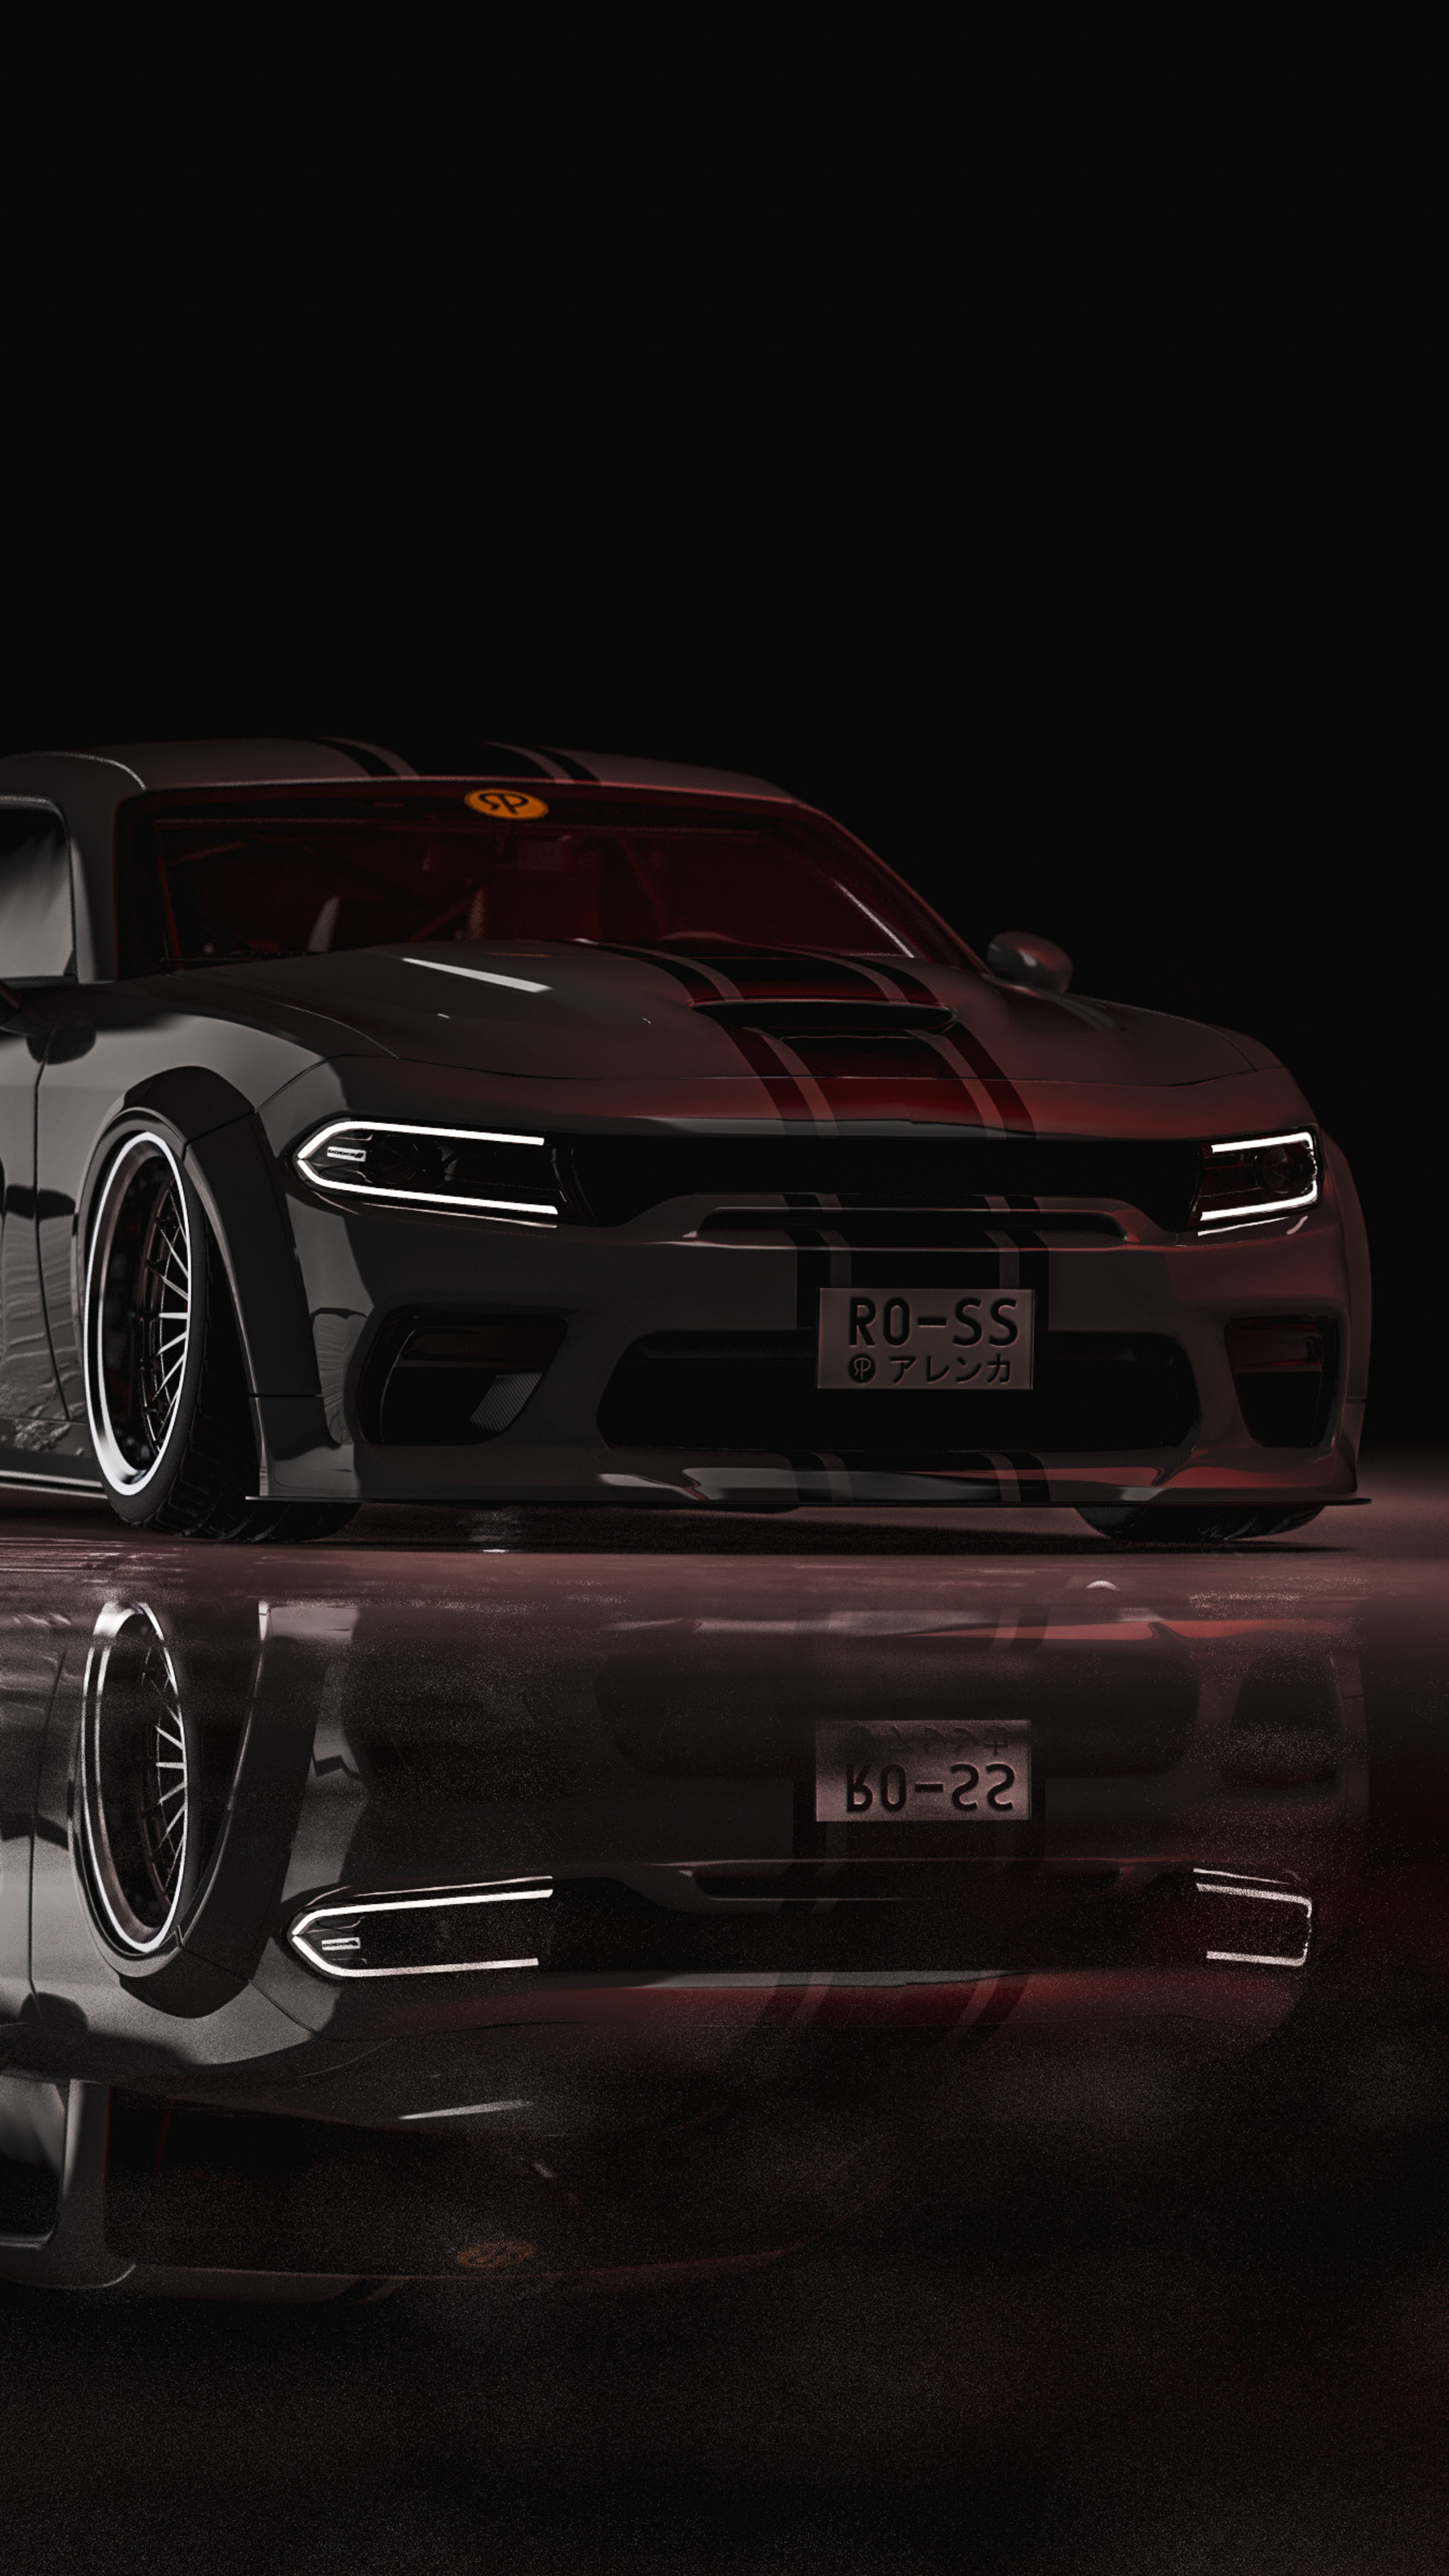 Dodge Charger, Coupe front view, High-performance, Striking design, 2160x3840 4K Phone